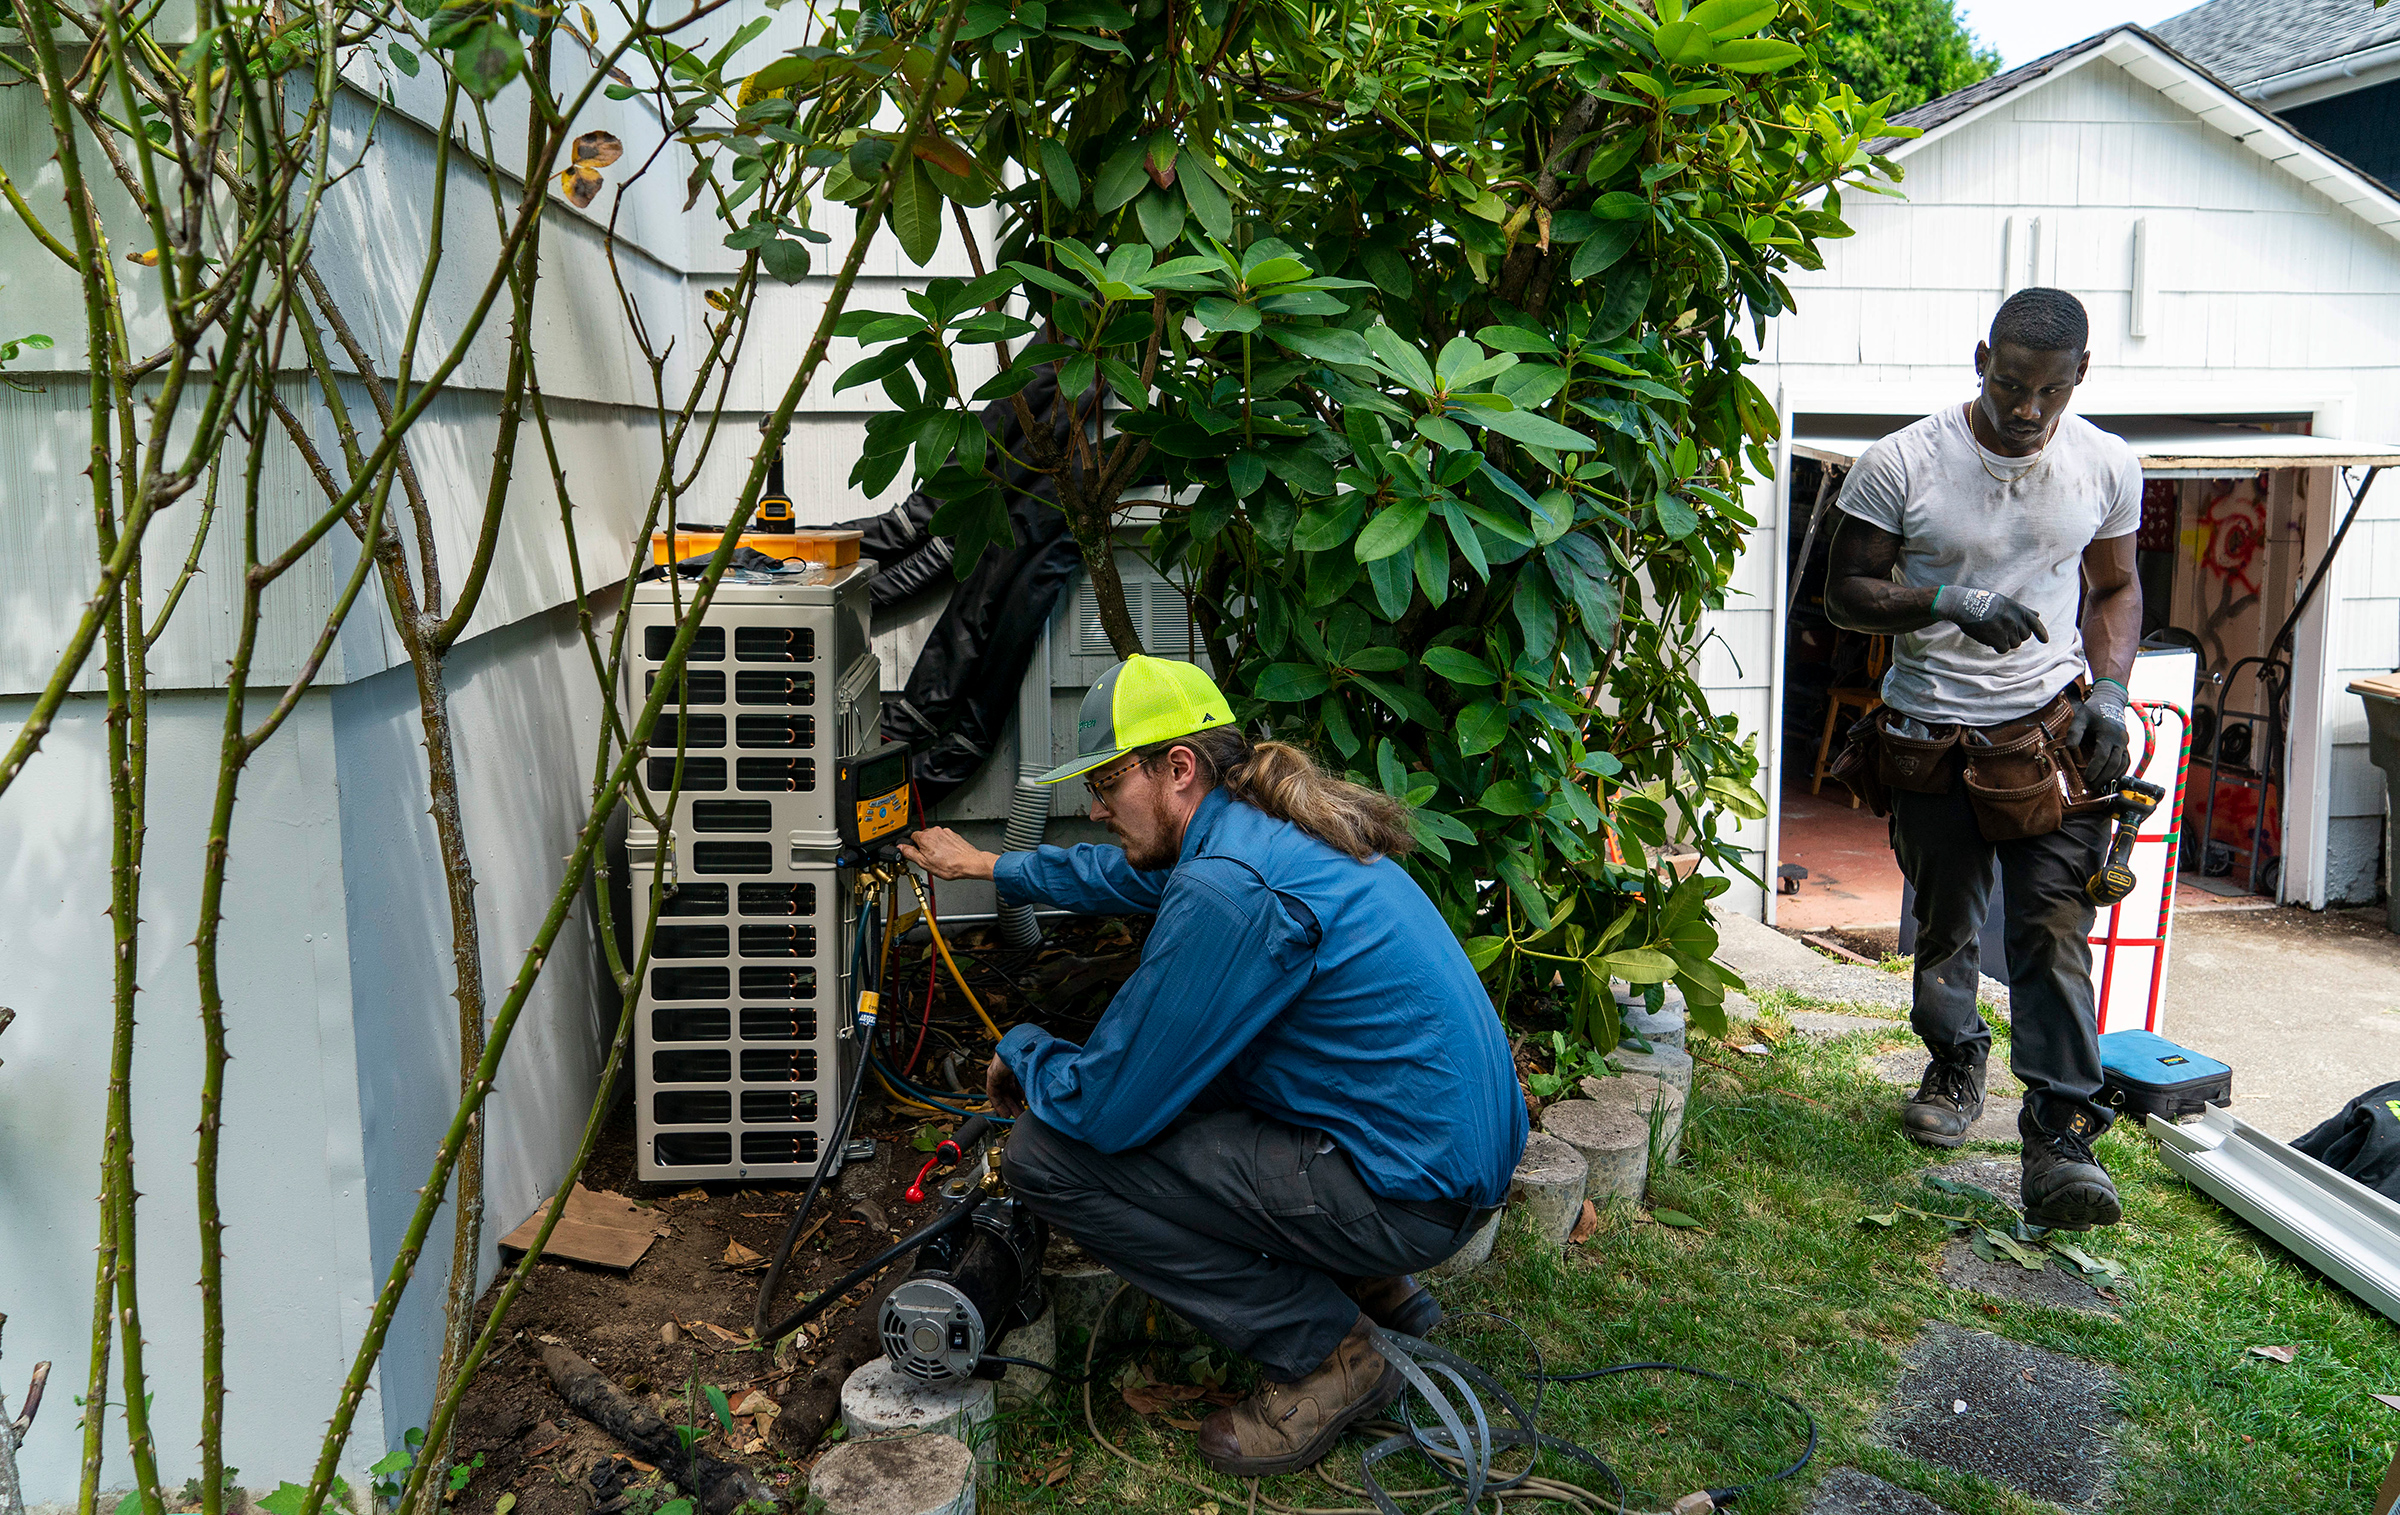 Luke Peters, left, and Elliott Thomas install a mini-split heating and air conditioning system at a home in Seattle on June 23, 2021. An intense heat wave soon set records across the region.